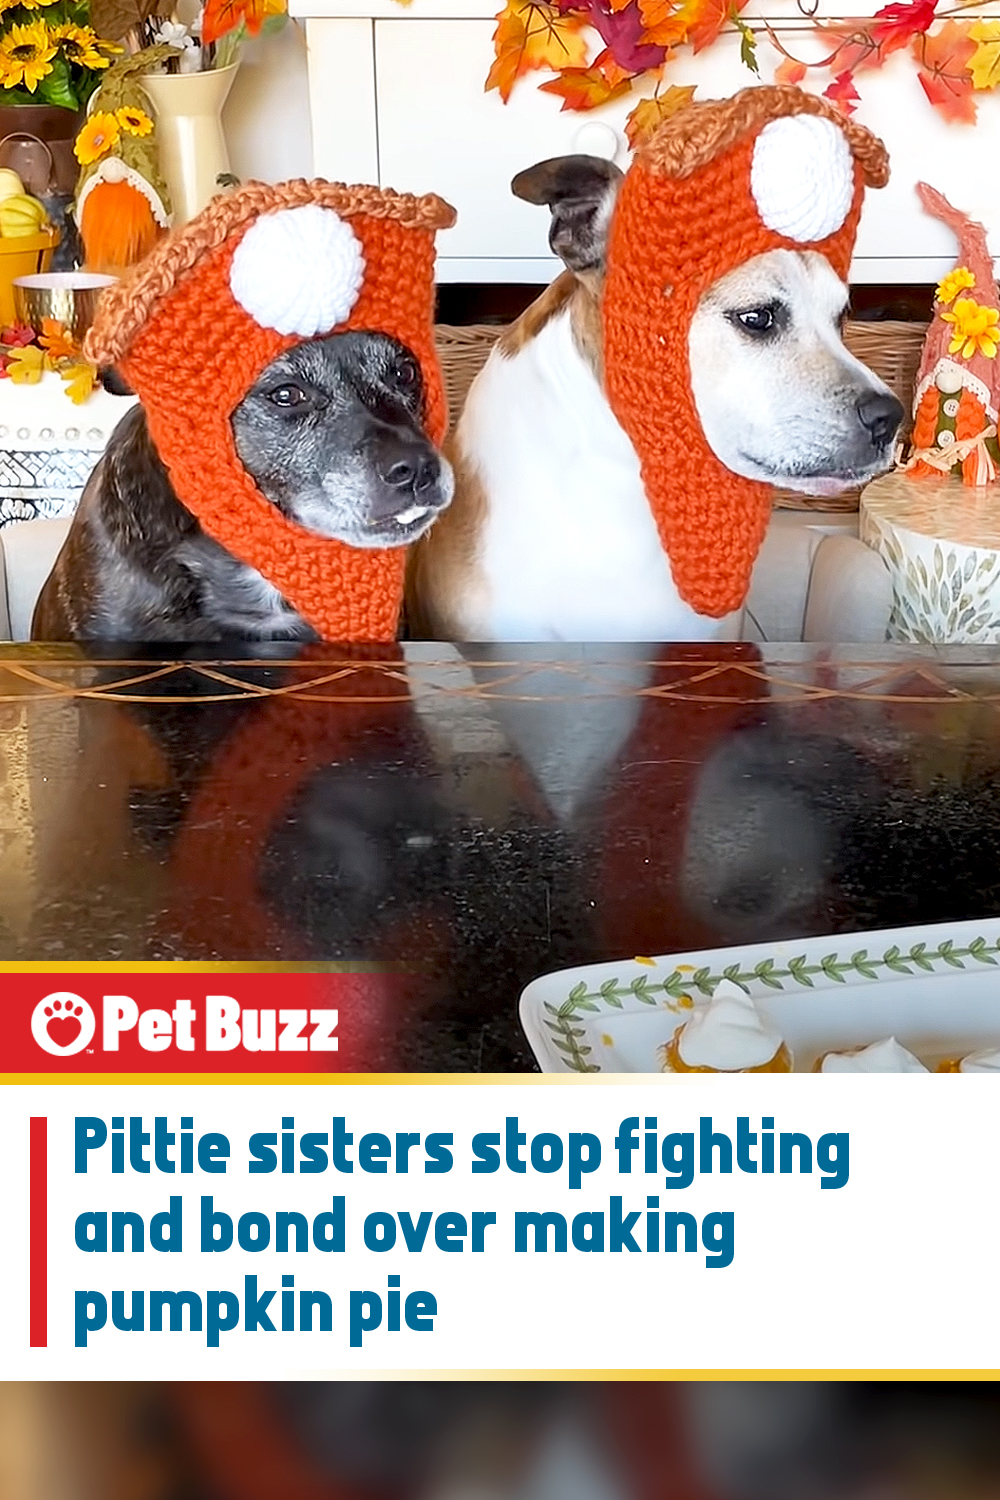 Pittie sisters stop fighting and bond over making pumpkin pie